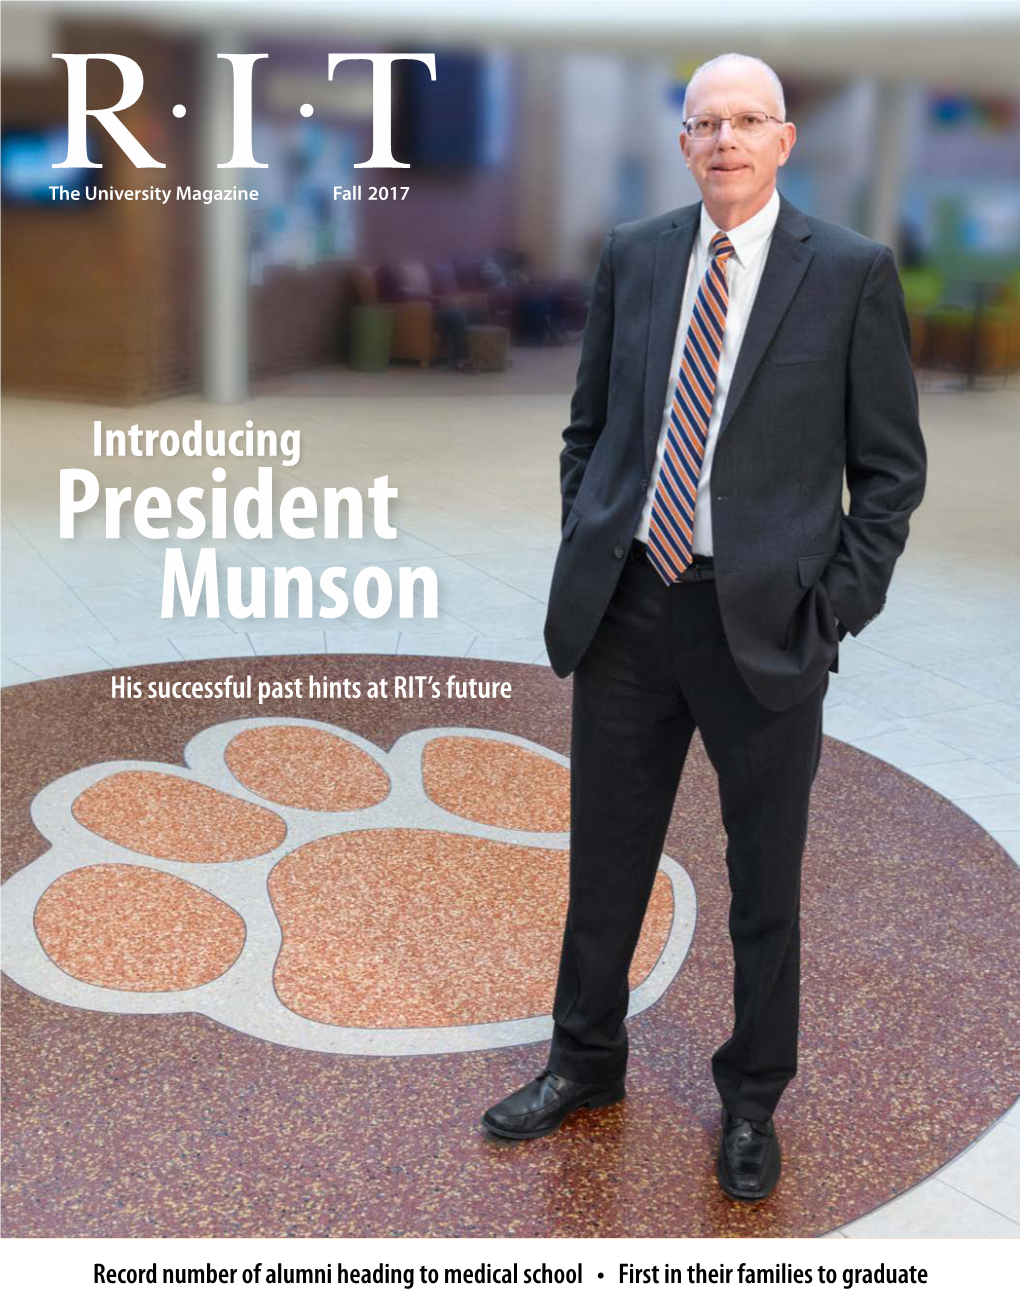 President Munson His Successful Past Hints at RIT’S Future